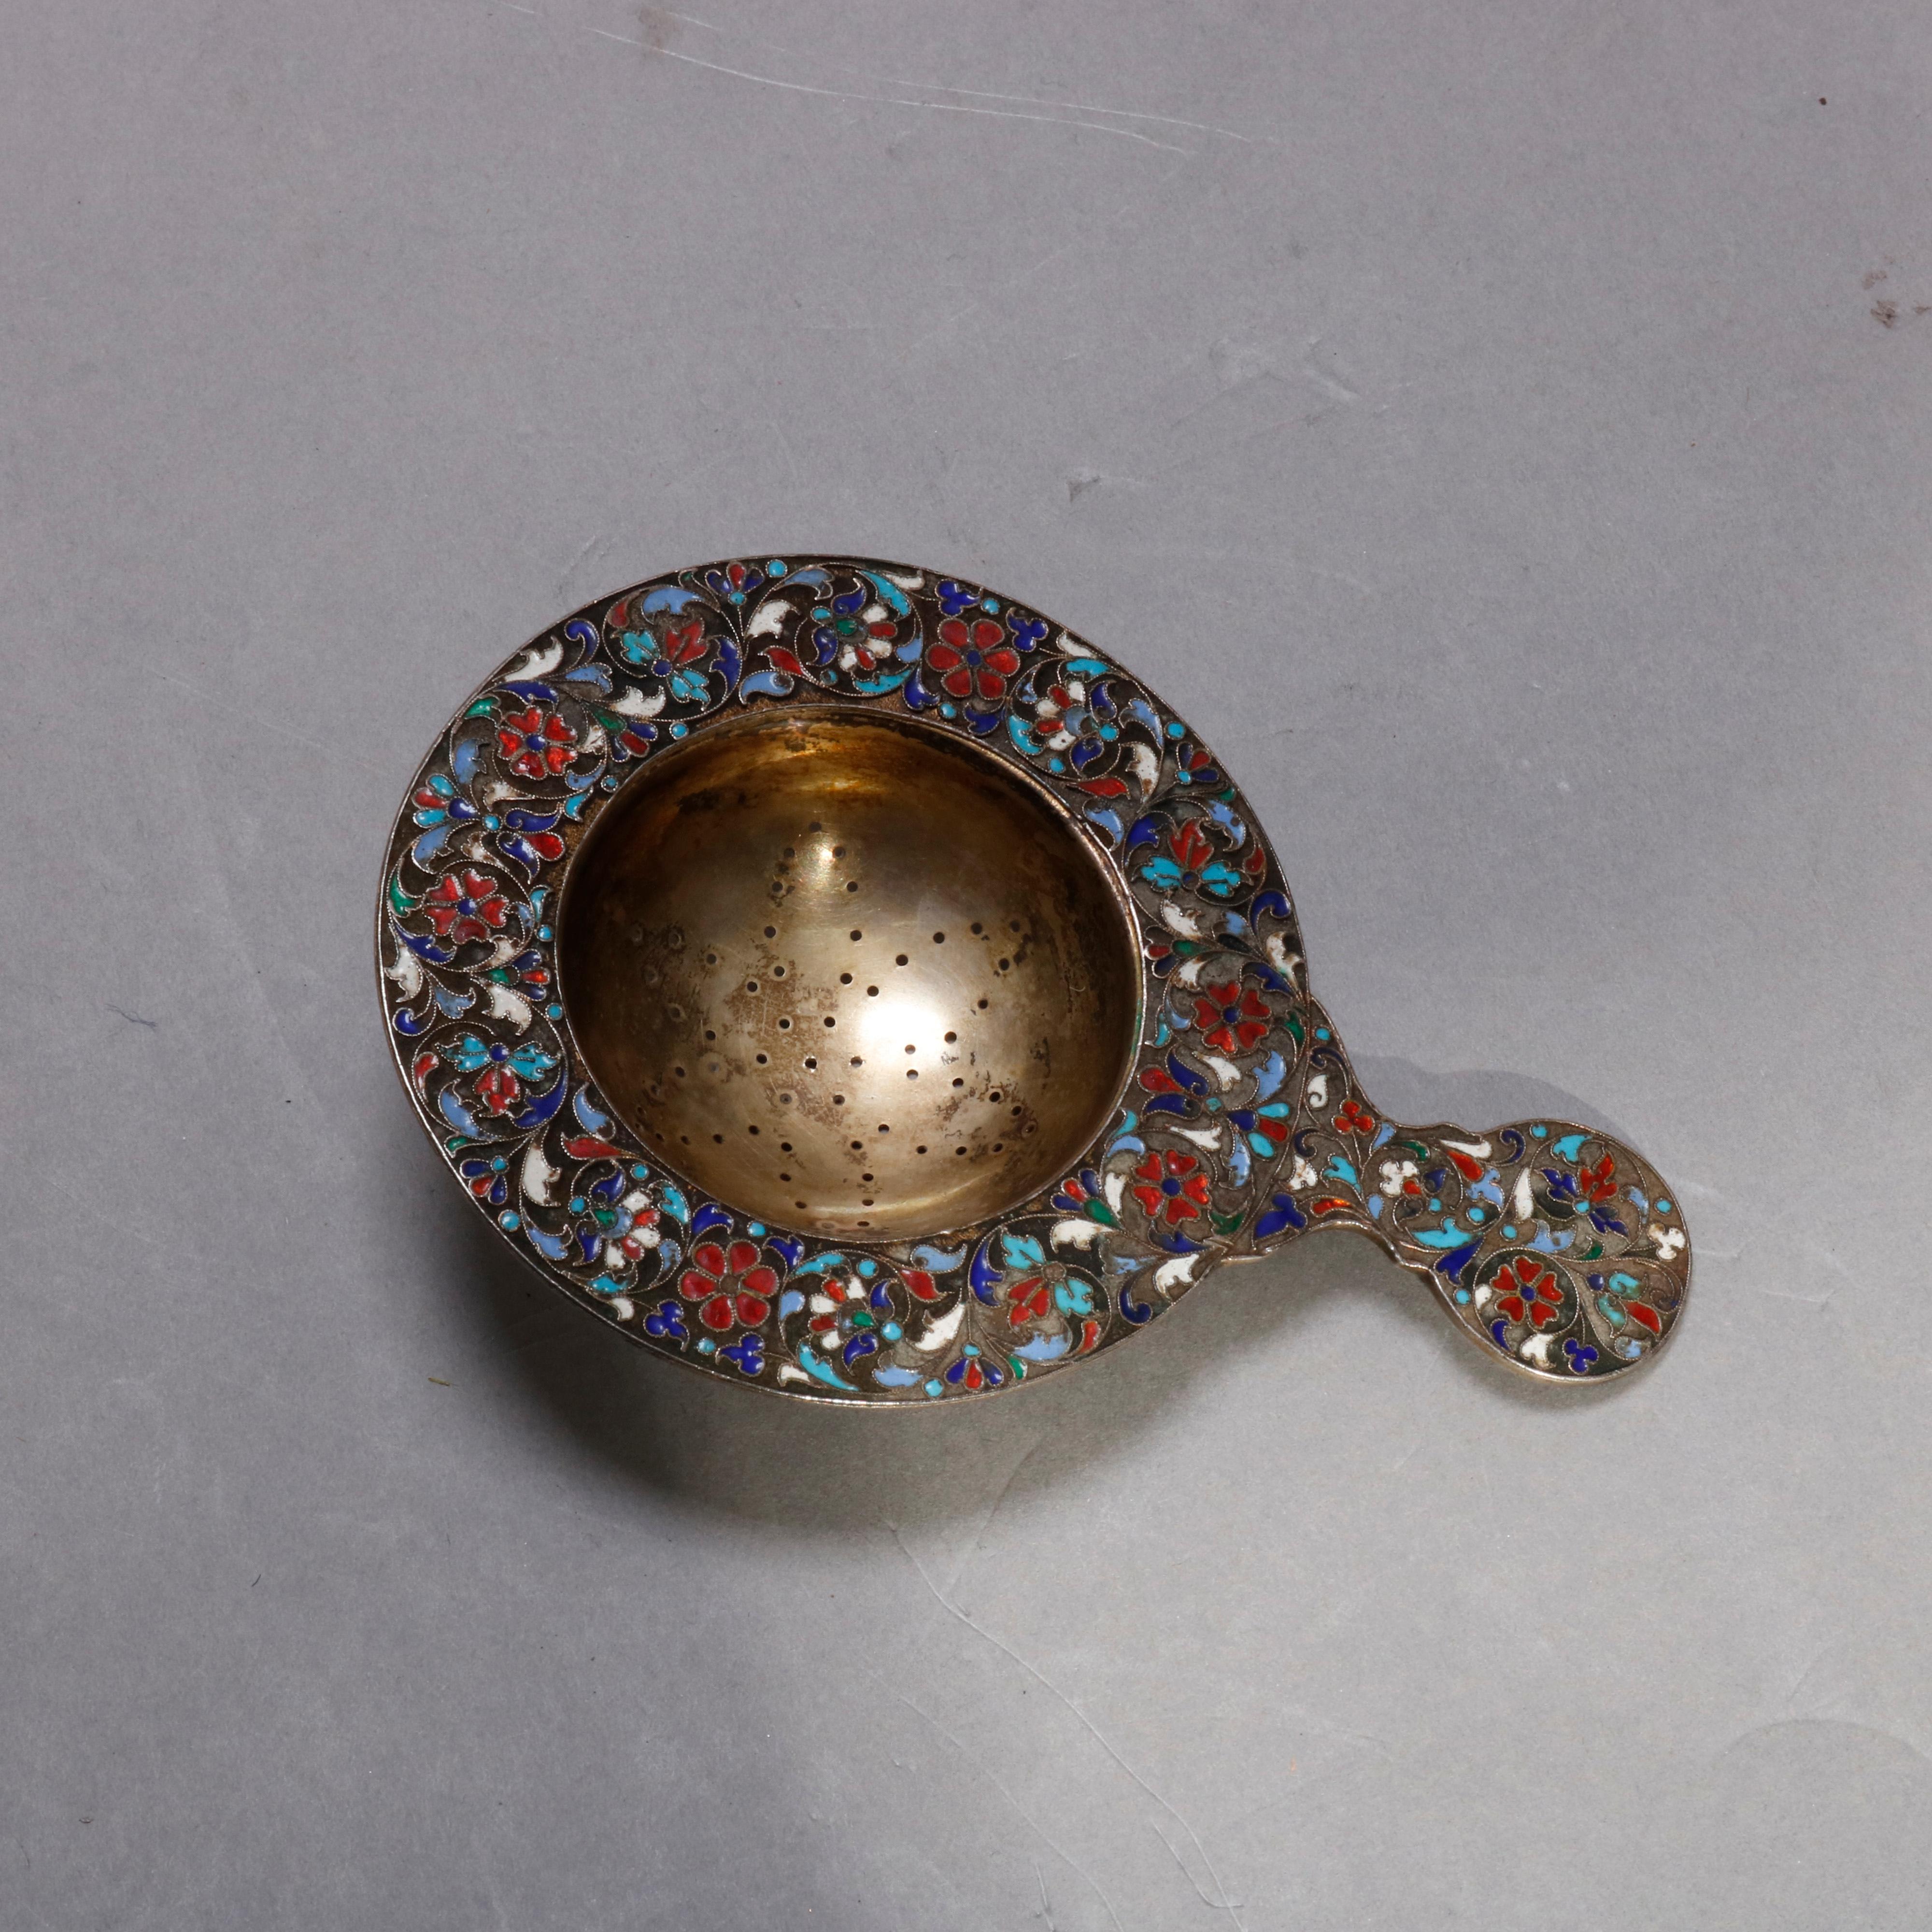 An antique Russian silver tea strainer with enameled scroll and foliate decoration throughout, unmarked, circa 1900.

Measures: 5 